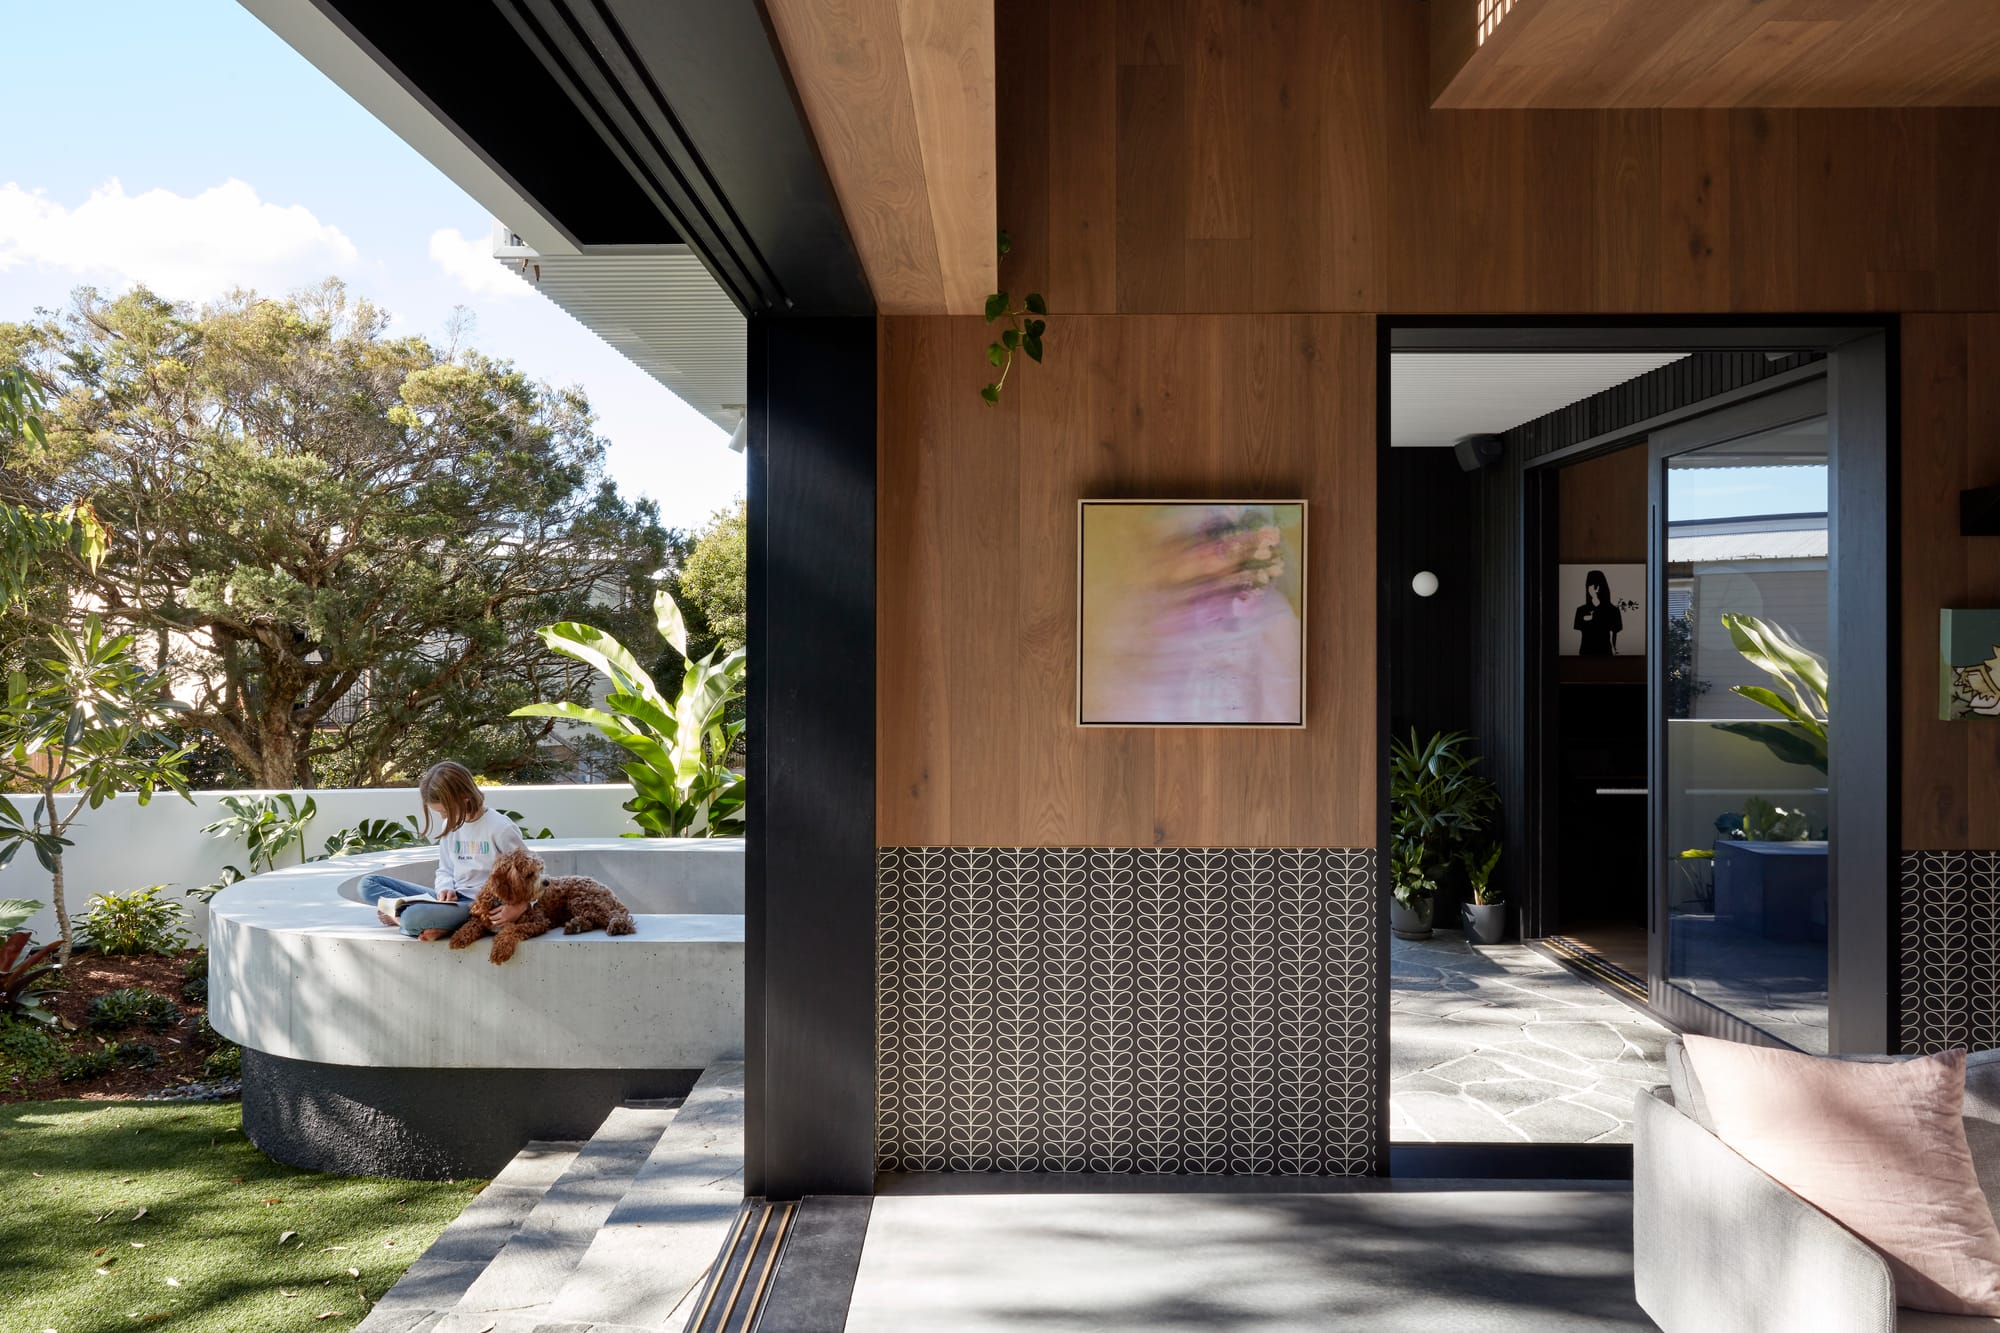 Uxbridge House by Tim Stewart Architects. Photography by Christopher Frederick Jones. Floor to ceiling door opening leading from interior of home to garden. Wood paneled walls inside. Green grass and cement half wall outside. 